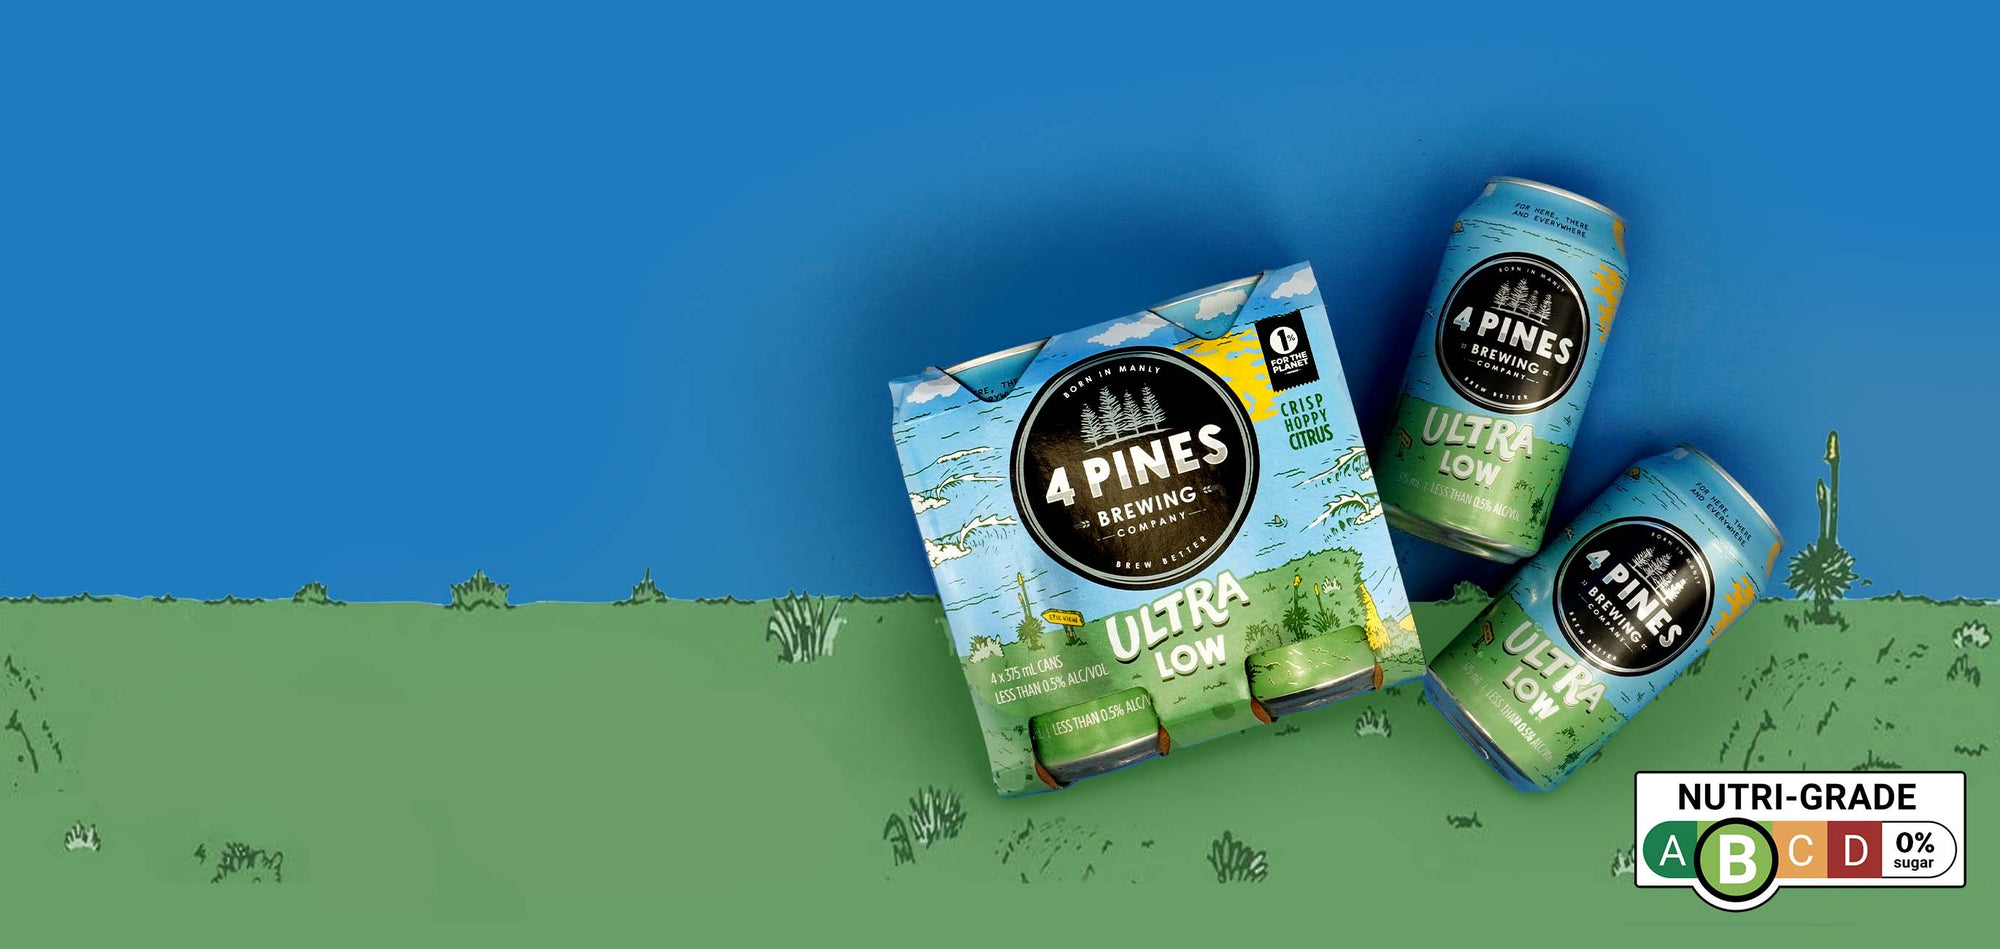 4 Pines Ultra Low Alcohol-Free Pale Ale